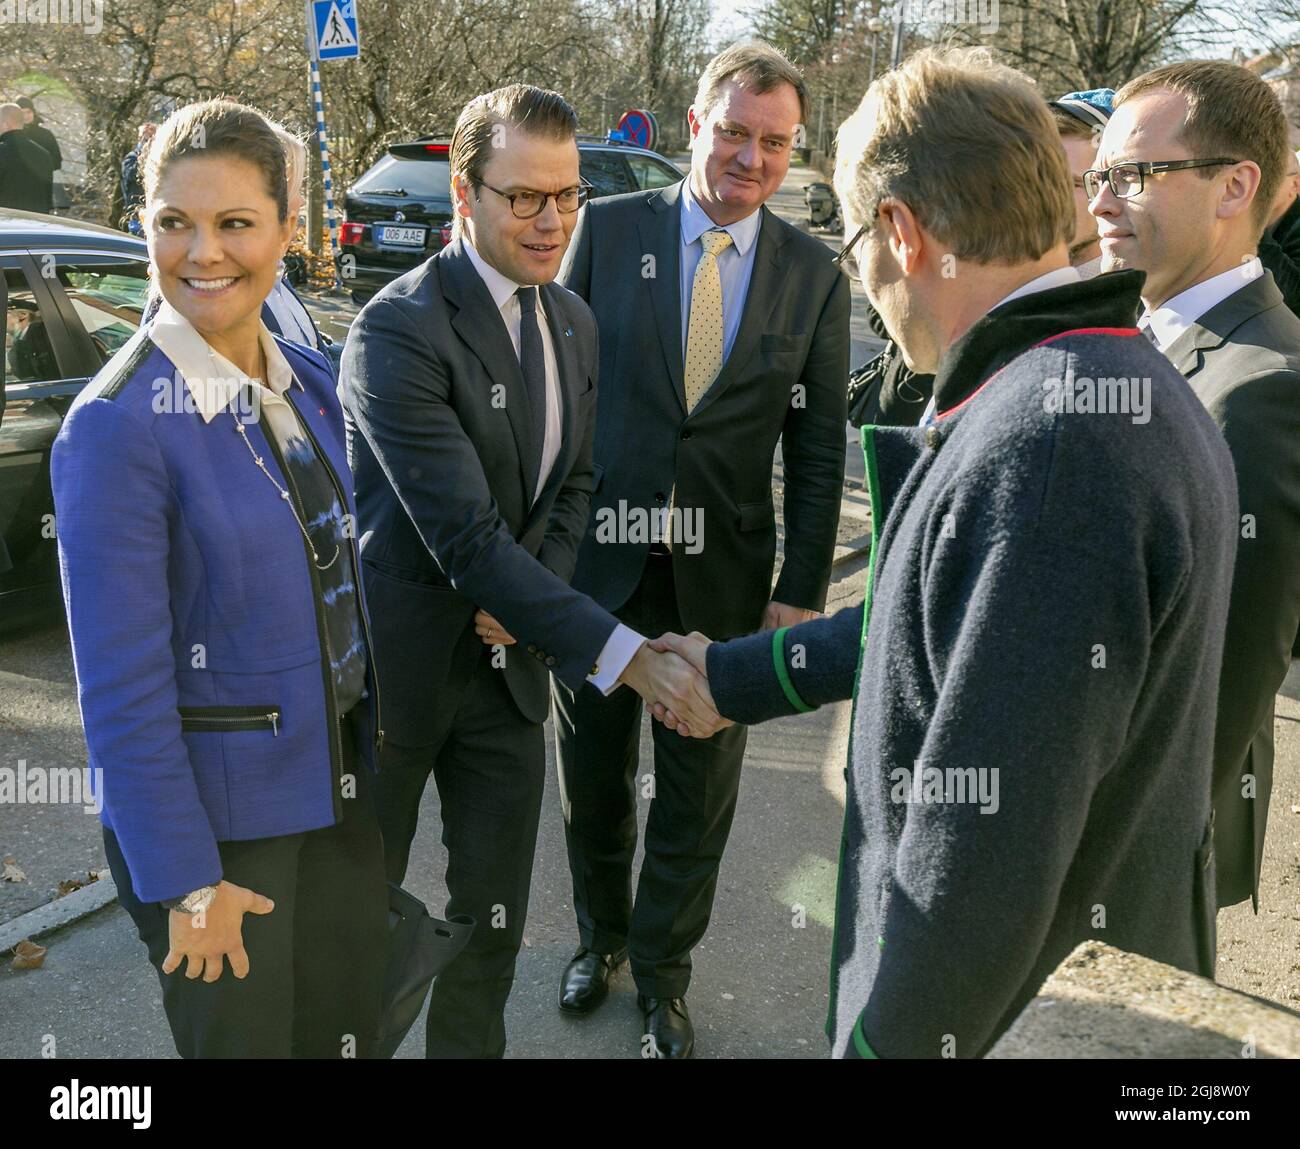 Tartu 2014-10-29 Crown Princess Victoria and Prince Daniel of Sweden are welcomed to a lunch hosted by Estonian Natioanl museum and Estonian Student's Society in Tartu the second day of their official visit to Estonia October 29, 2014. Foto Karli Saul/ SCANPIX BALTICS / TT / kod 20985 ref:  Stock Photo